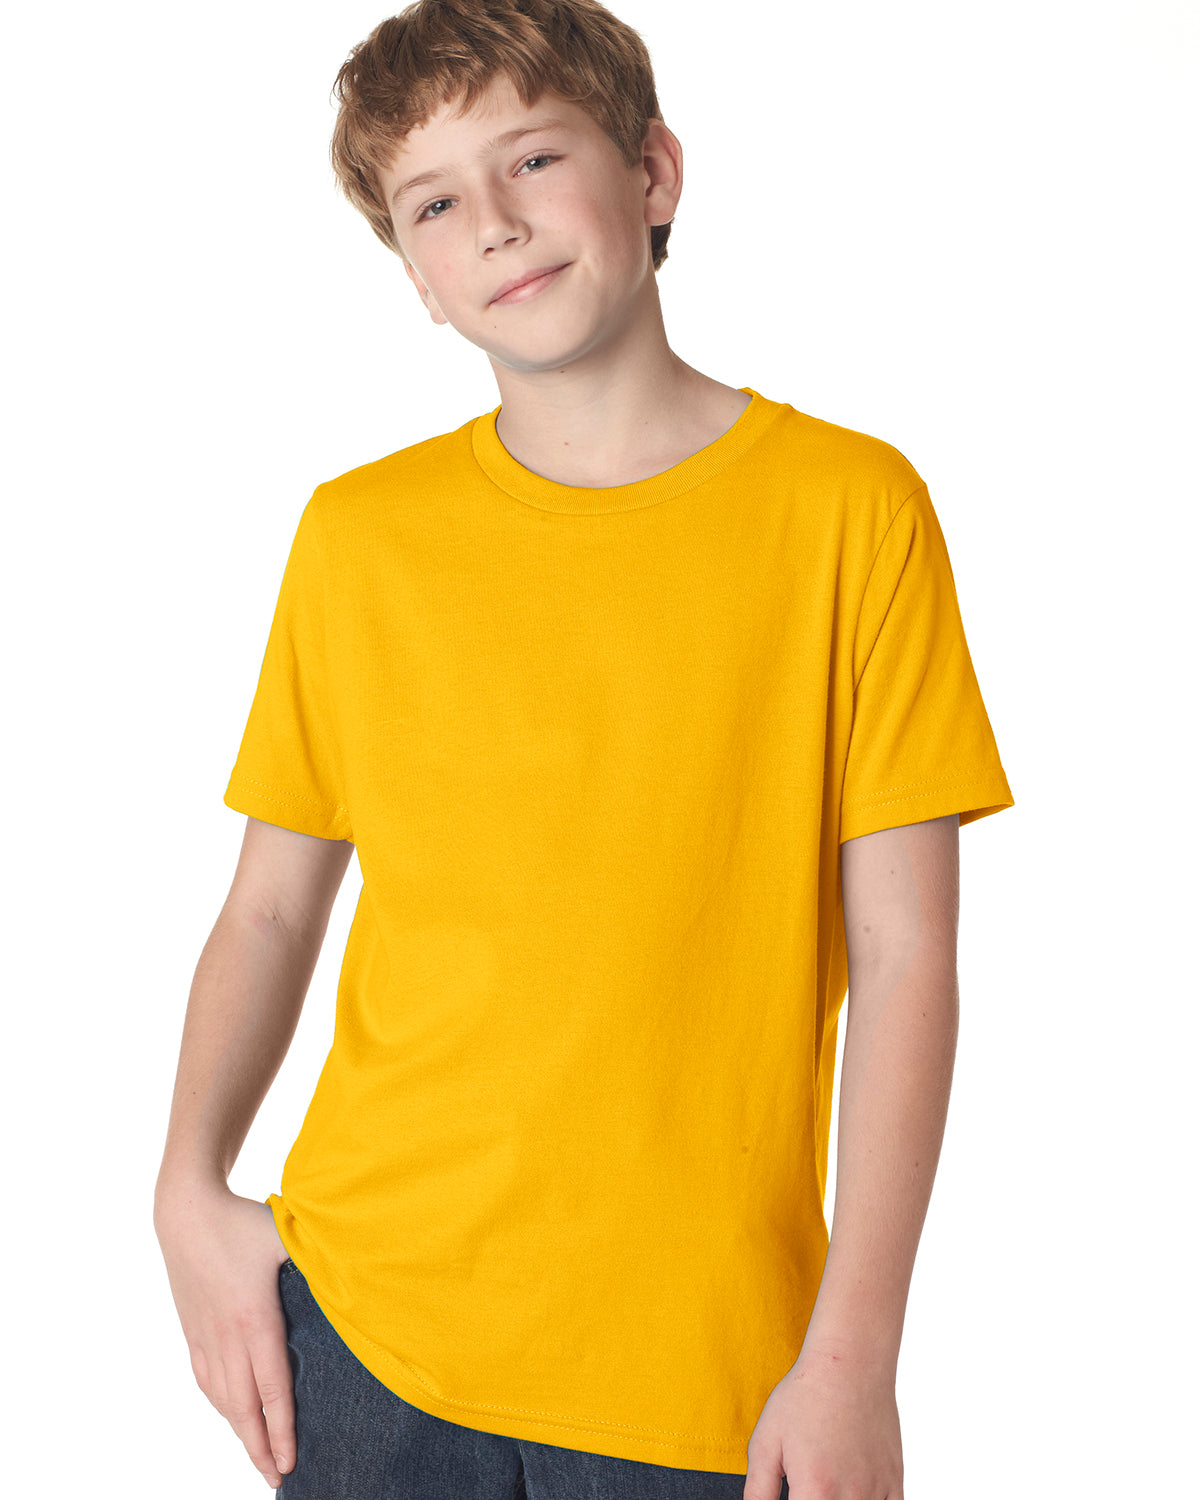 child model wearing next level youth tee in gold